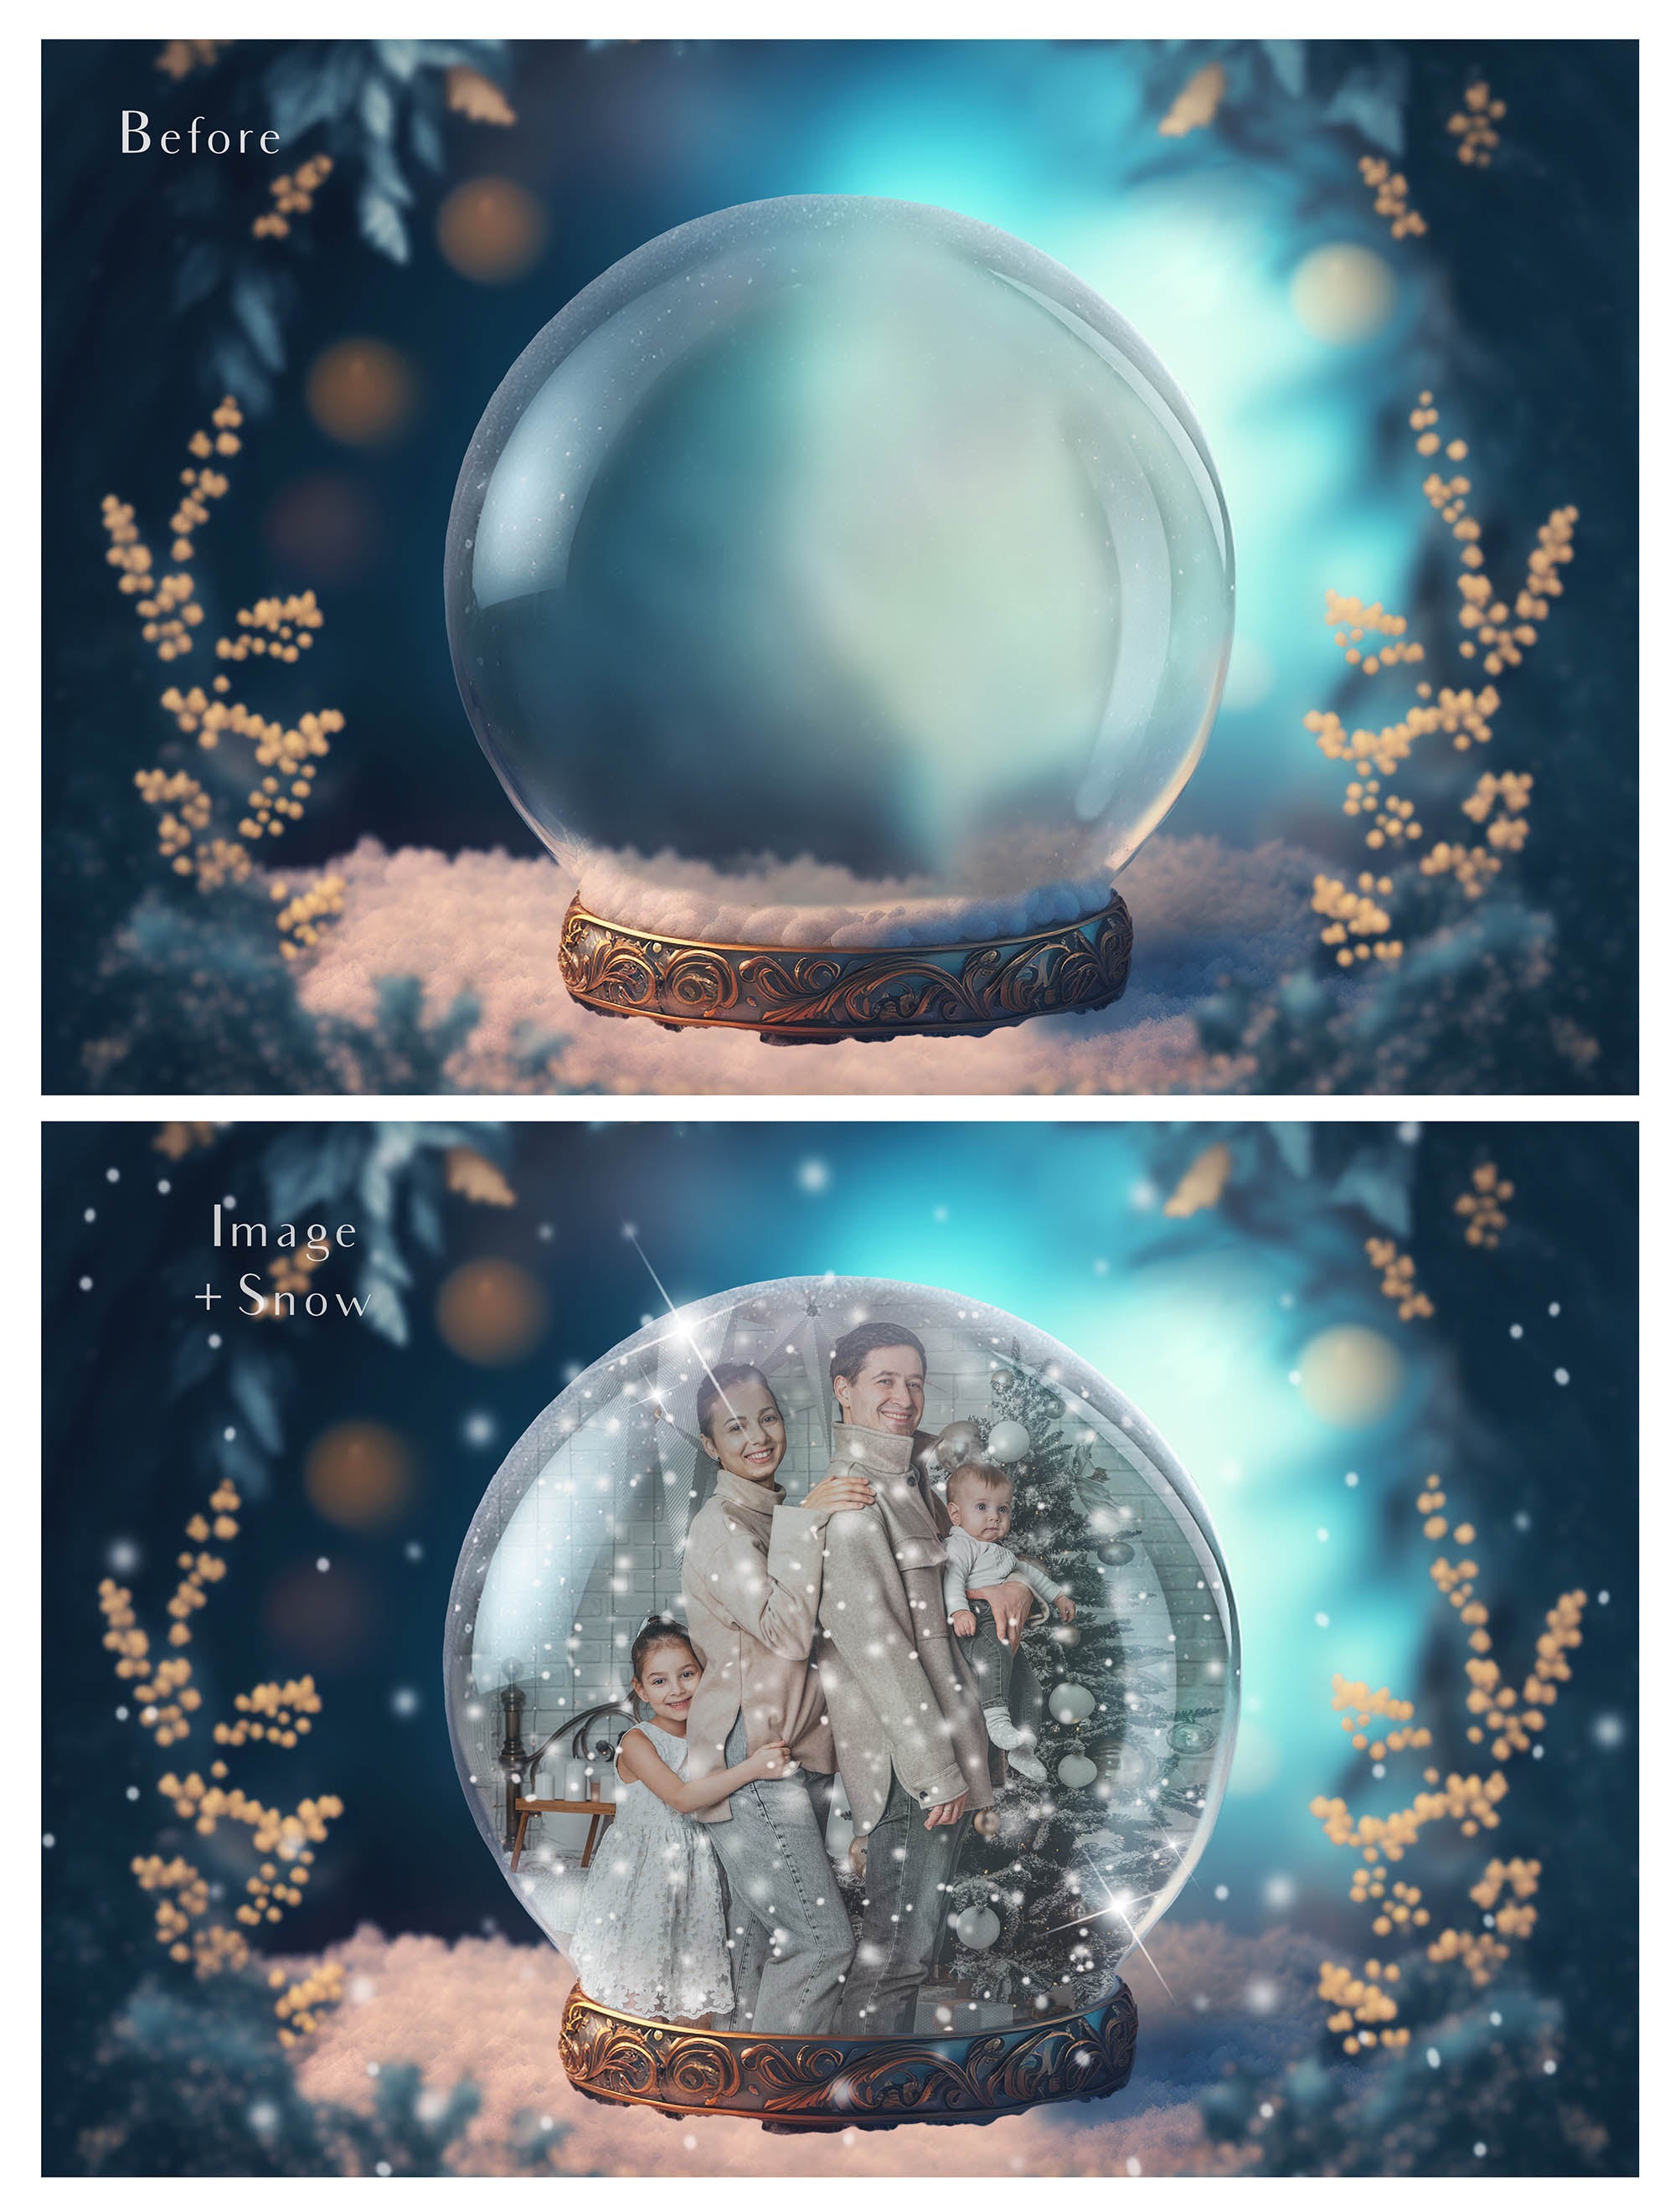 Digital background, Christmas Snow Globe Template for photoshop.  Includes jpeg background, png overlay background and snow overlays.  Video tutorial is also included in this PSD photoshop template. Perfect to add your own images. For Photography.